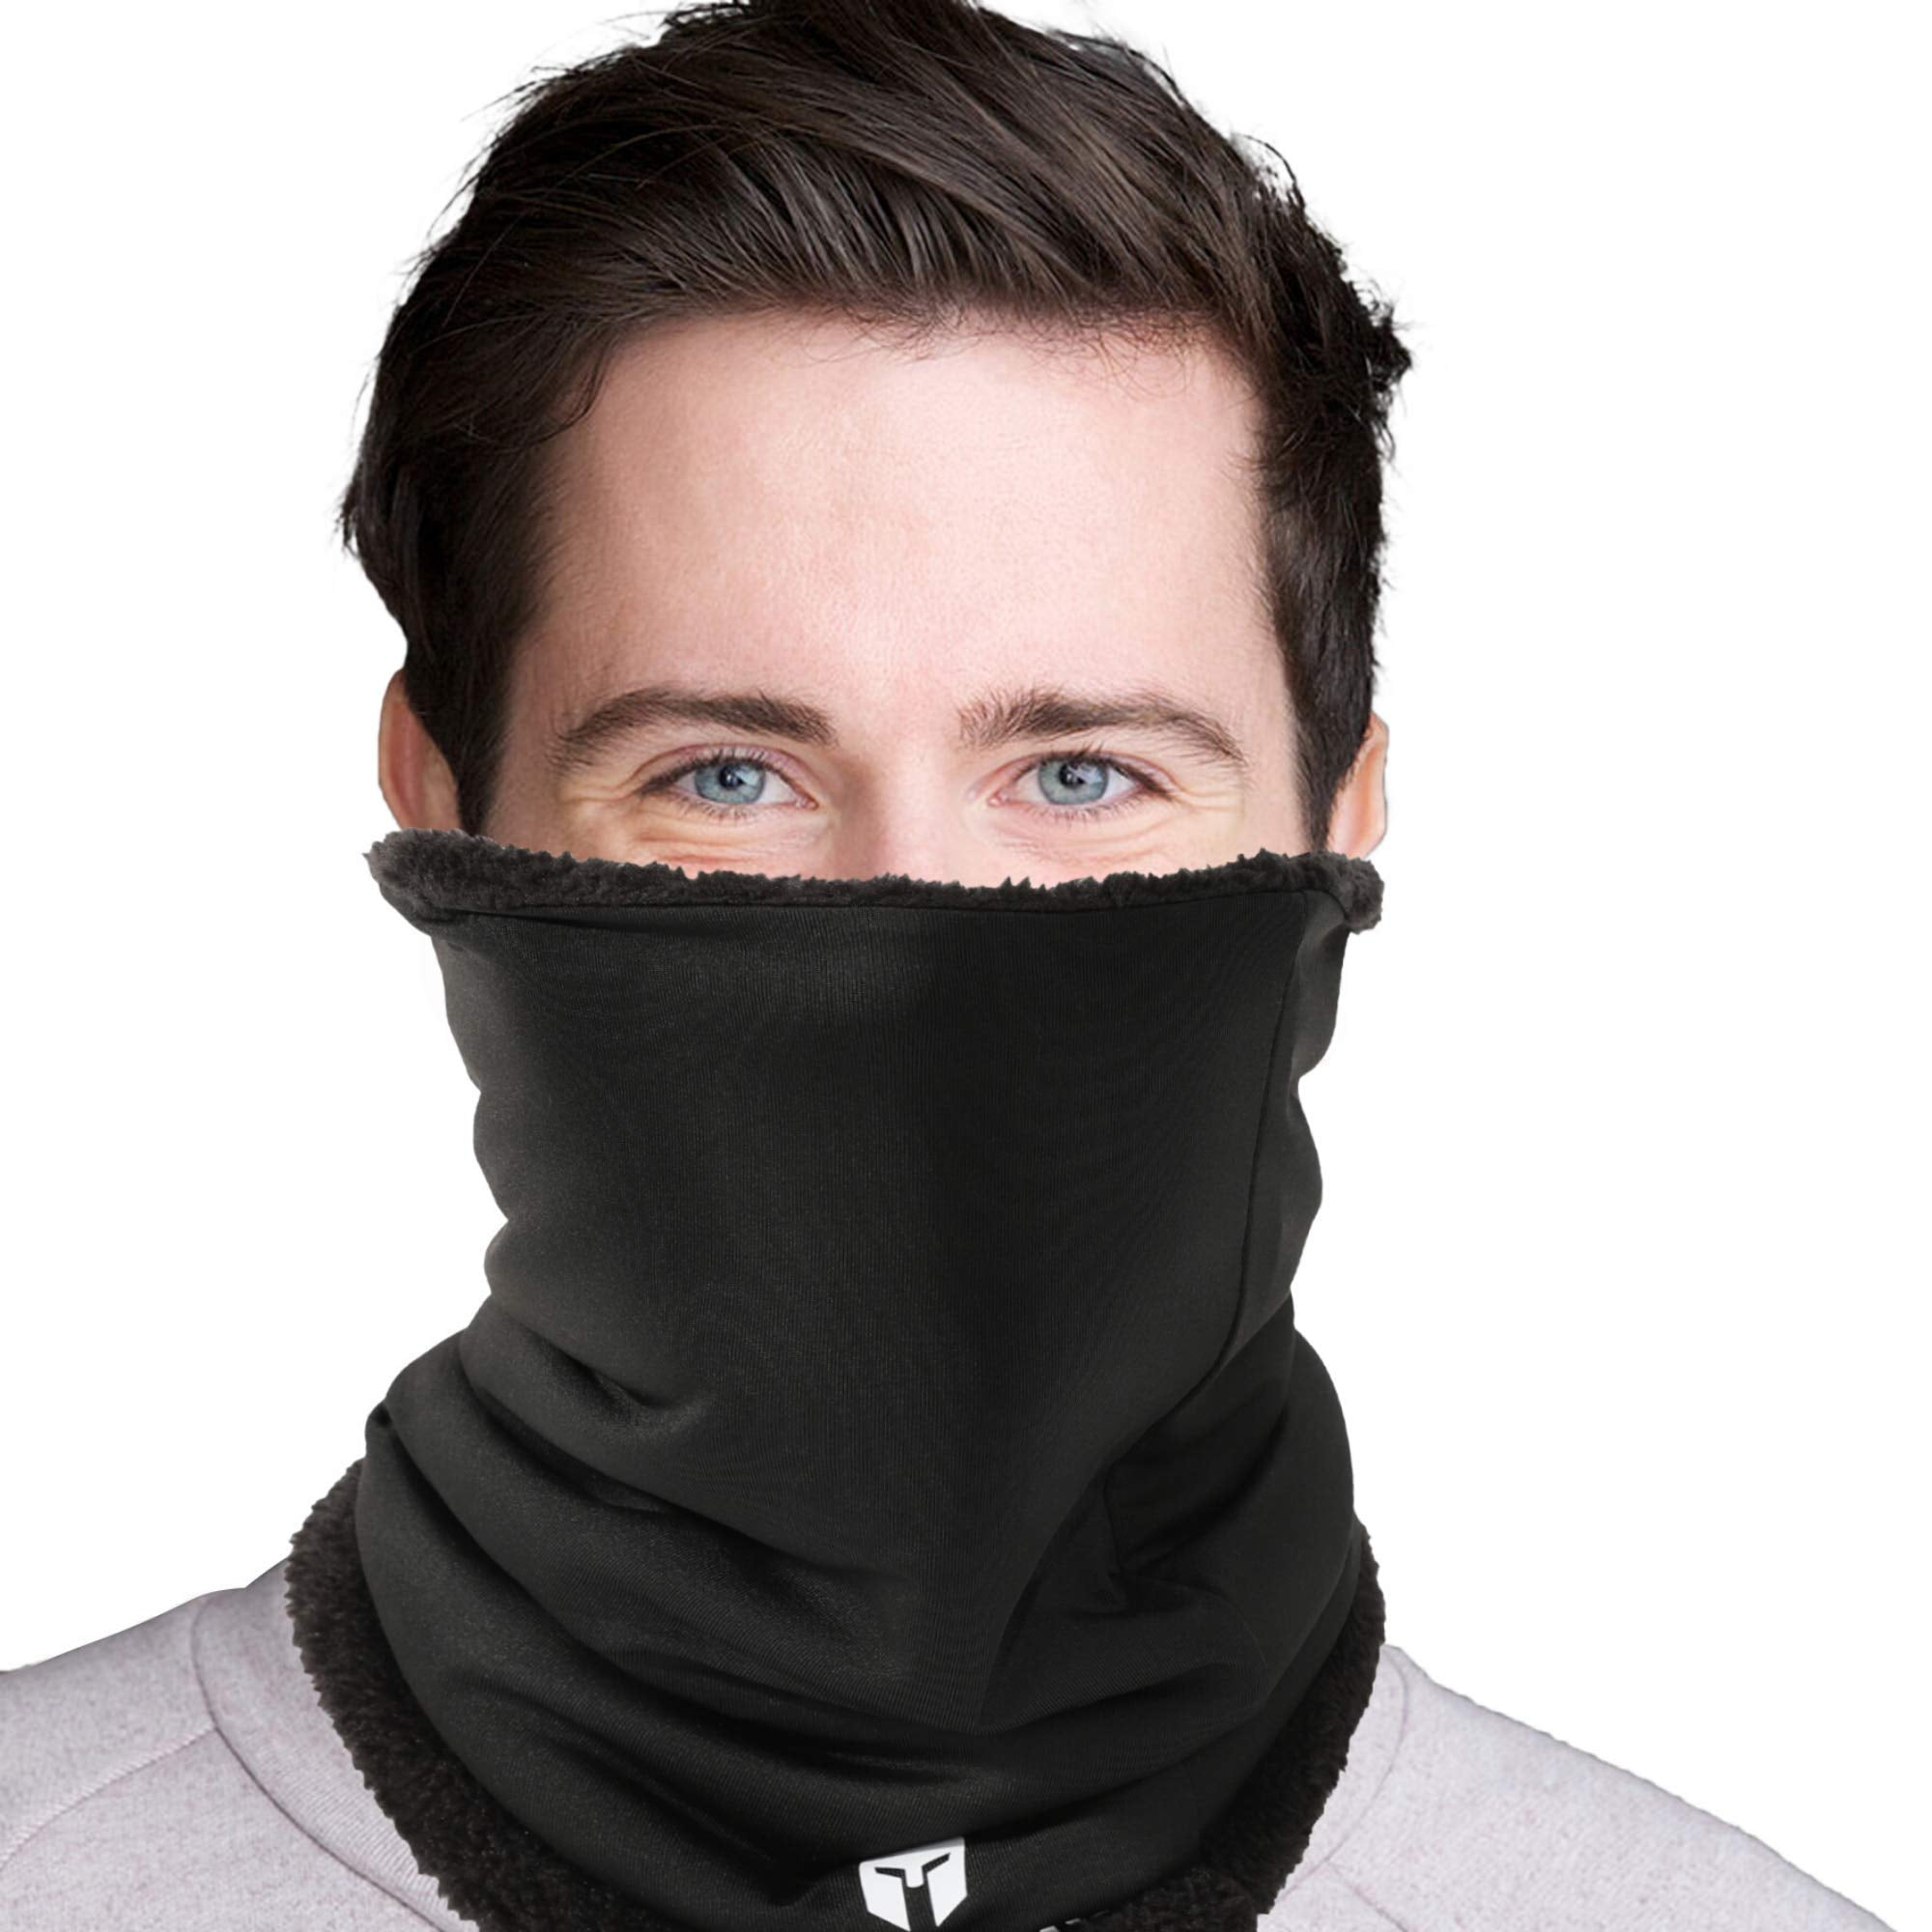 Winter Neck Gaiter Warmer Windproof Face Mask for Cold Weather Skiing Running 